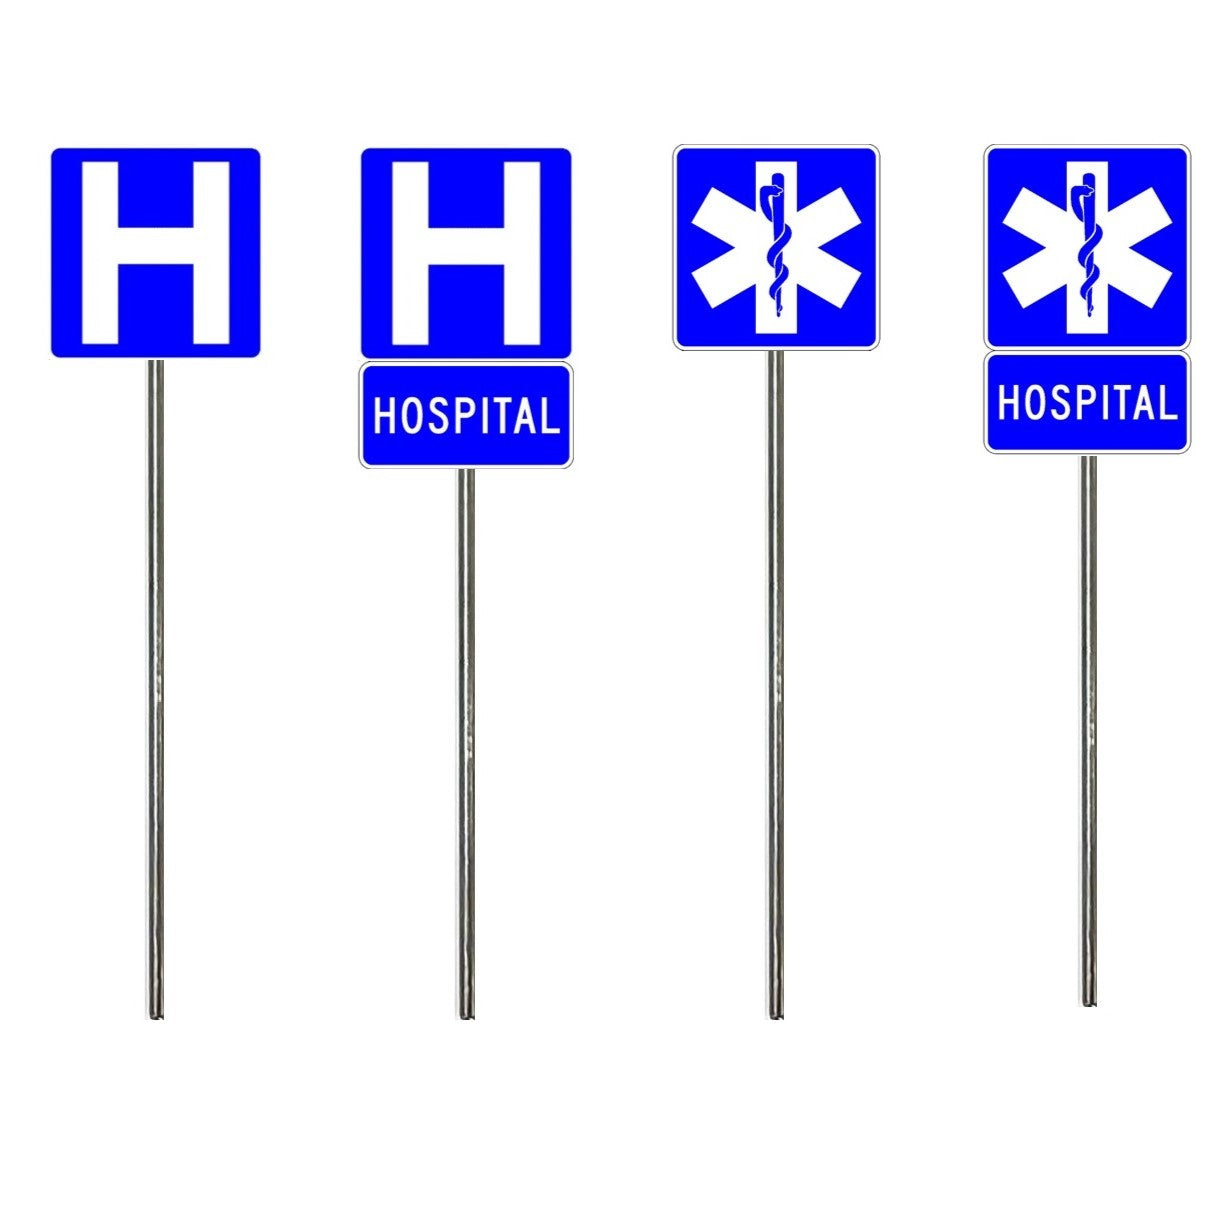 Model Railroad Hospital Signs H Hospital with Small lower sign, Star of Life with Hospital Sign on Metal Poles, O Scale, HO Scale, N Scale, S Scale